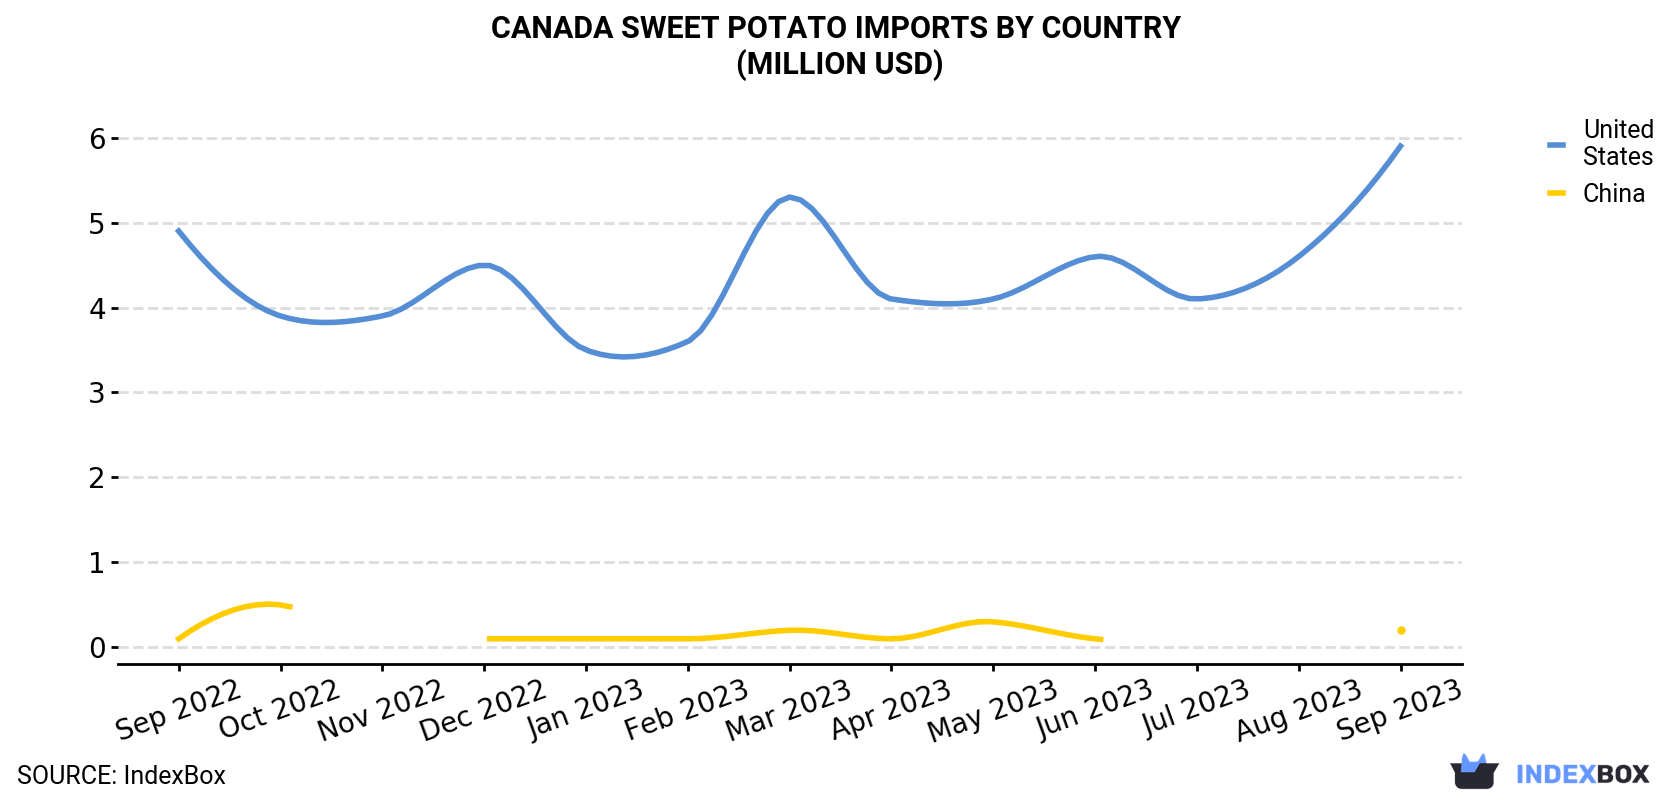 Canada Sweet Potato Imports By Country (Million USD)